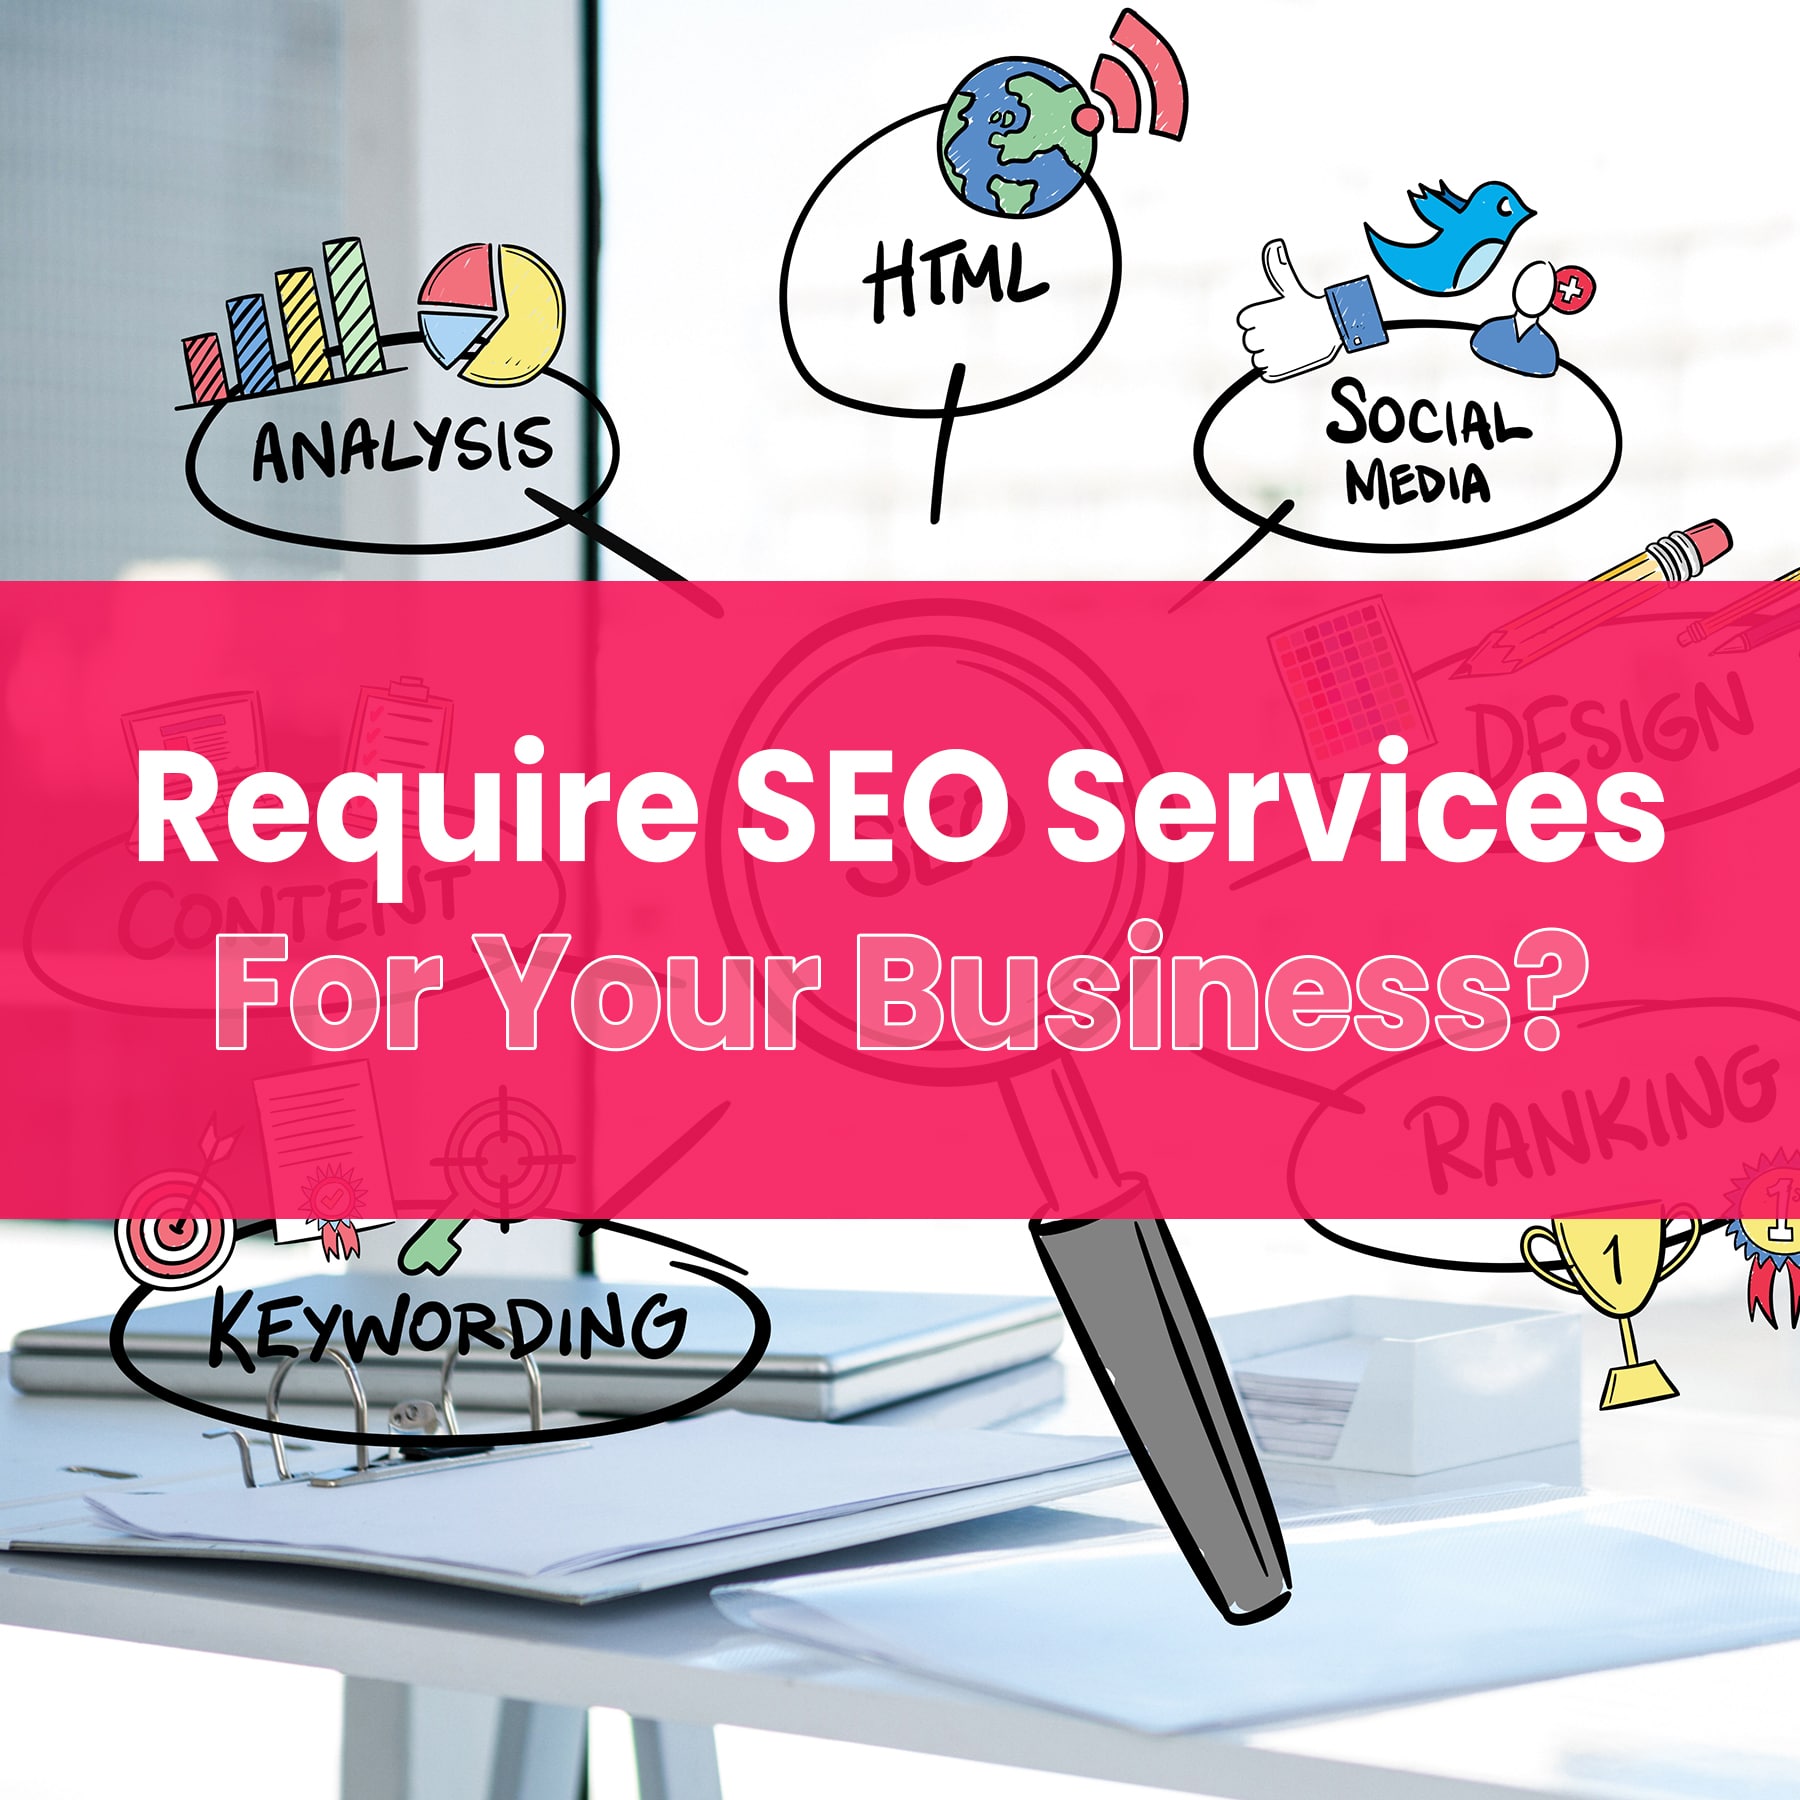 We-are-Here-to-Help-SEO-services-in-london-Webvizion